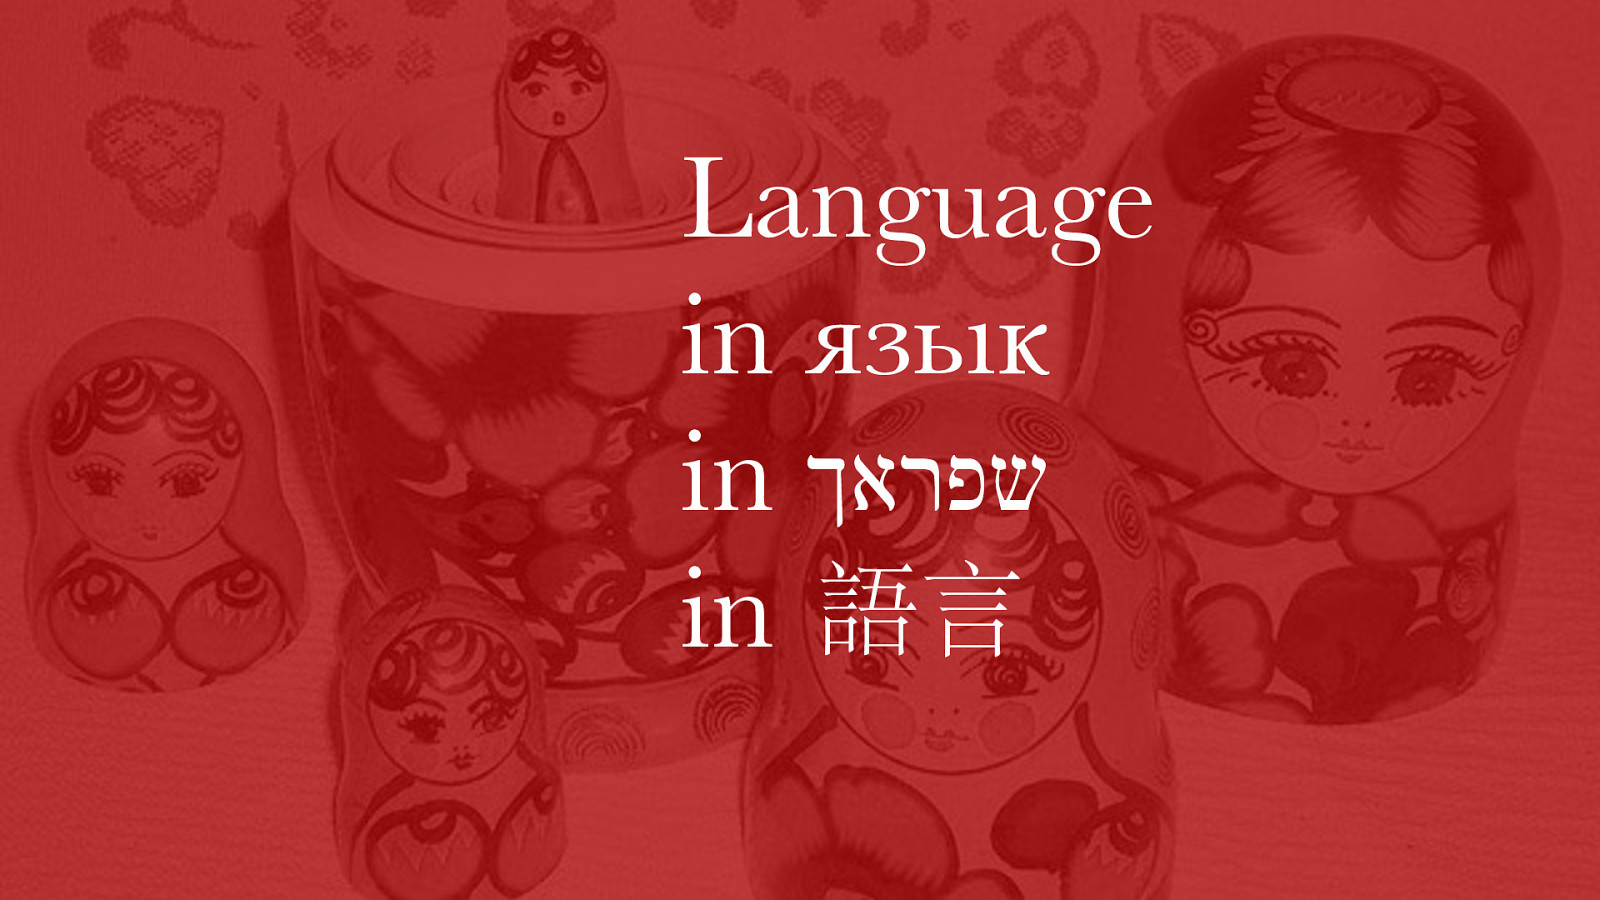 Language in язык in שפראך in 語言